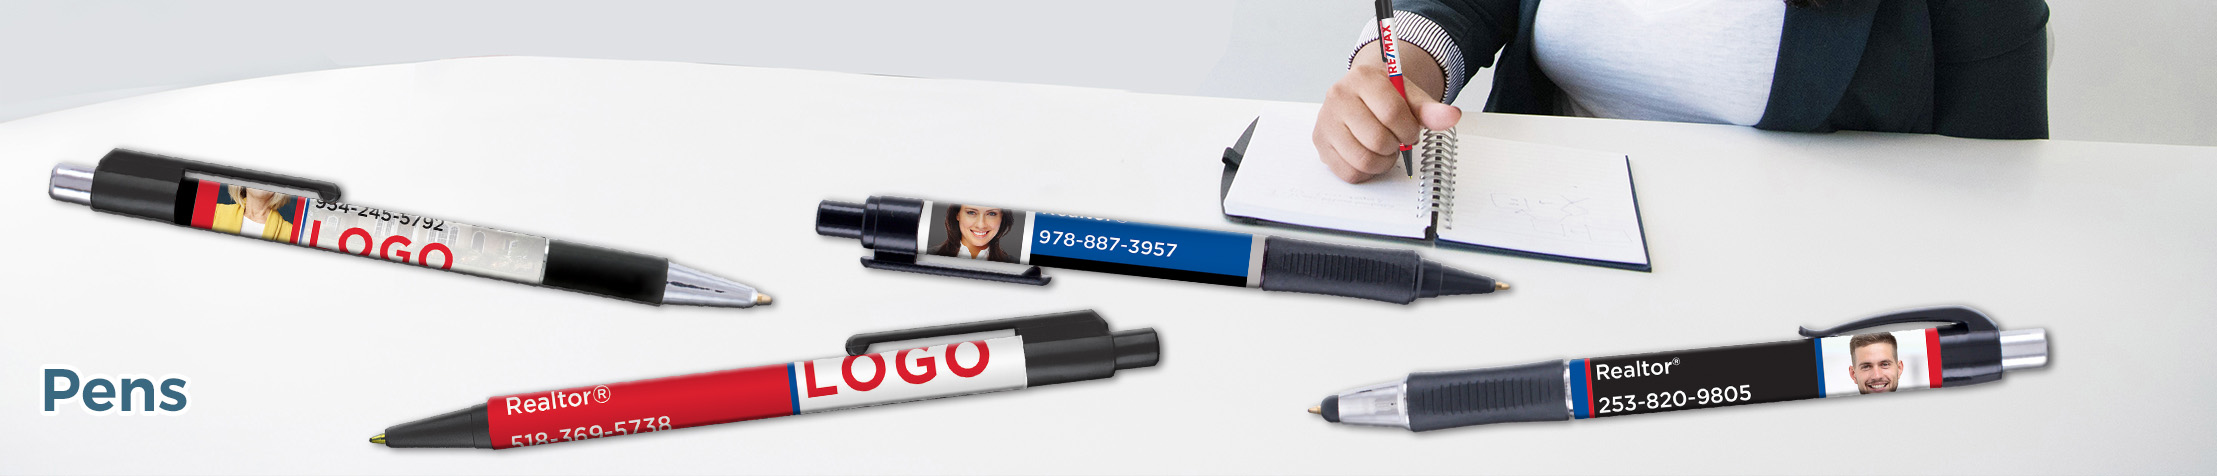 RE/MAX Real Estate Pens - RE/MAX  personalized realtor promotional products | BestPrintBuy.com